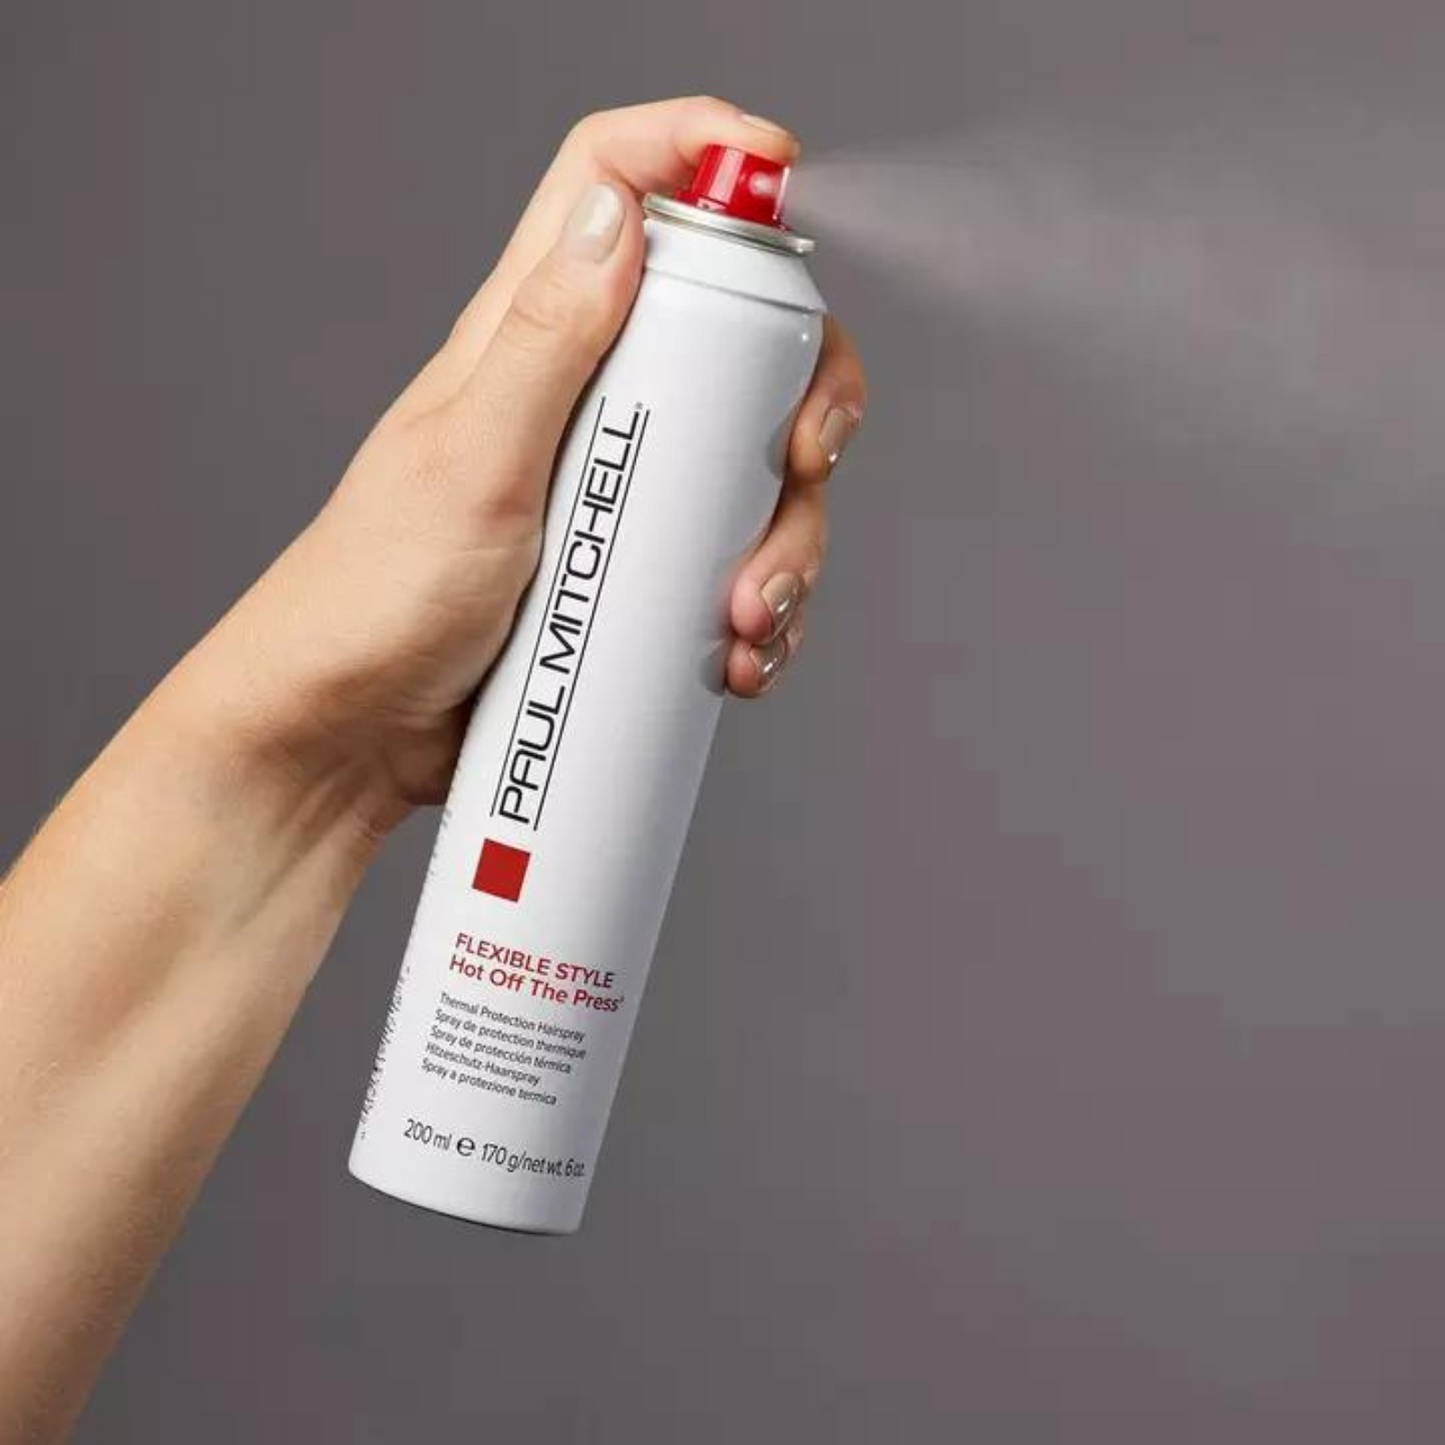 Paul Mitchell - Flexible Style Hot Off The Press Thermal Protection Hairspray